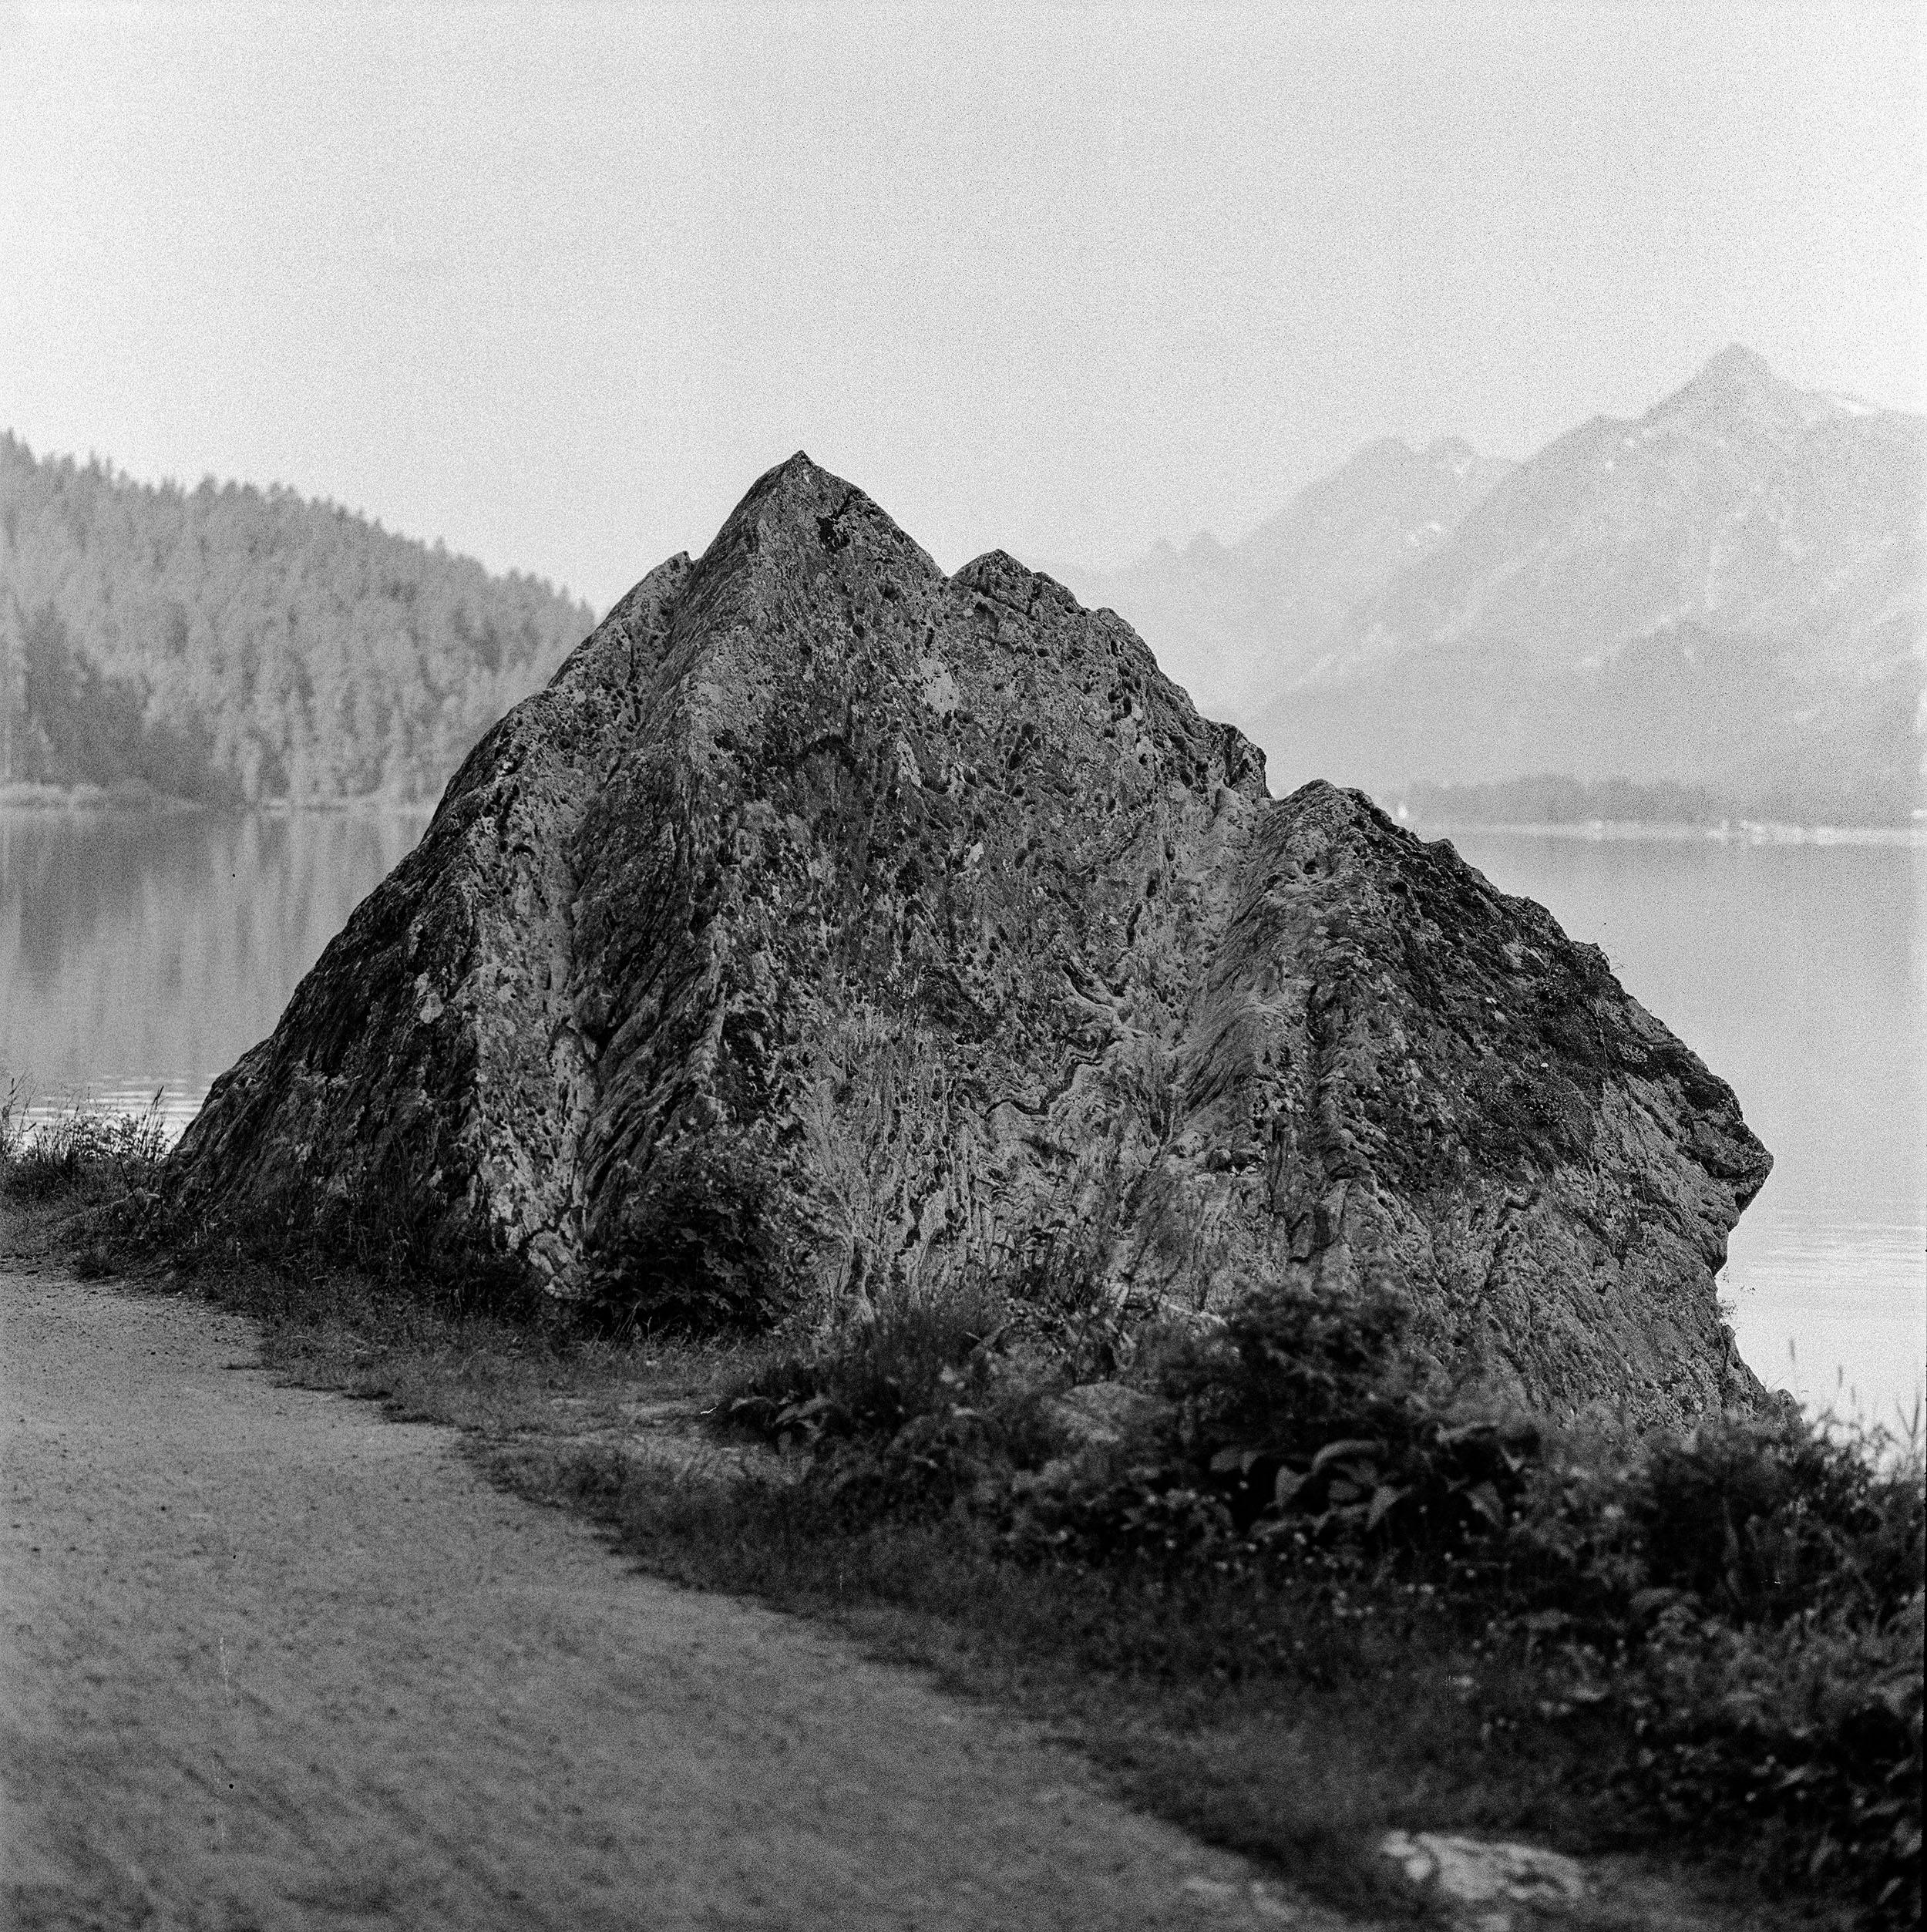 A black and white photograph depicting a large triangle-shaped stone on the shore of a lake, with mountains faintly visible in the background.